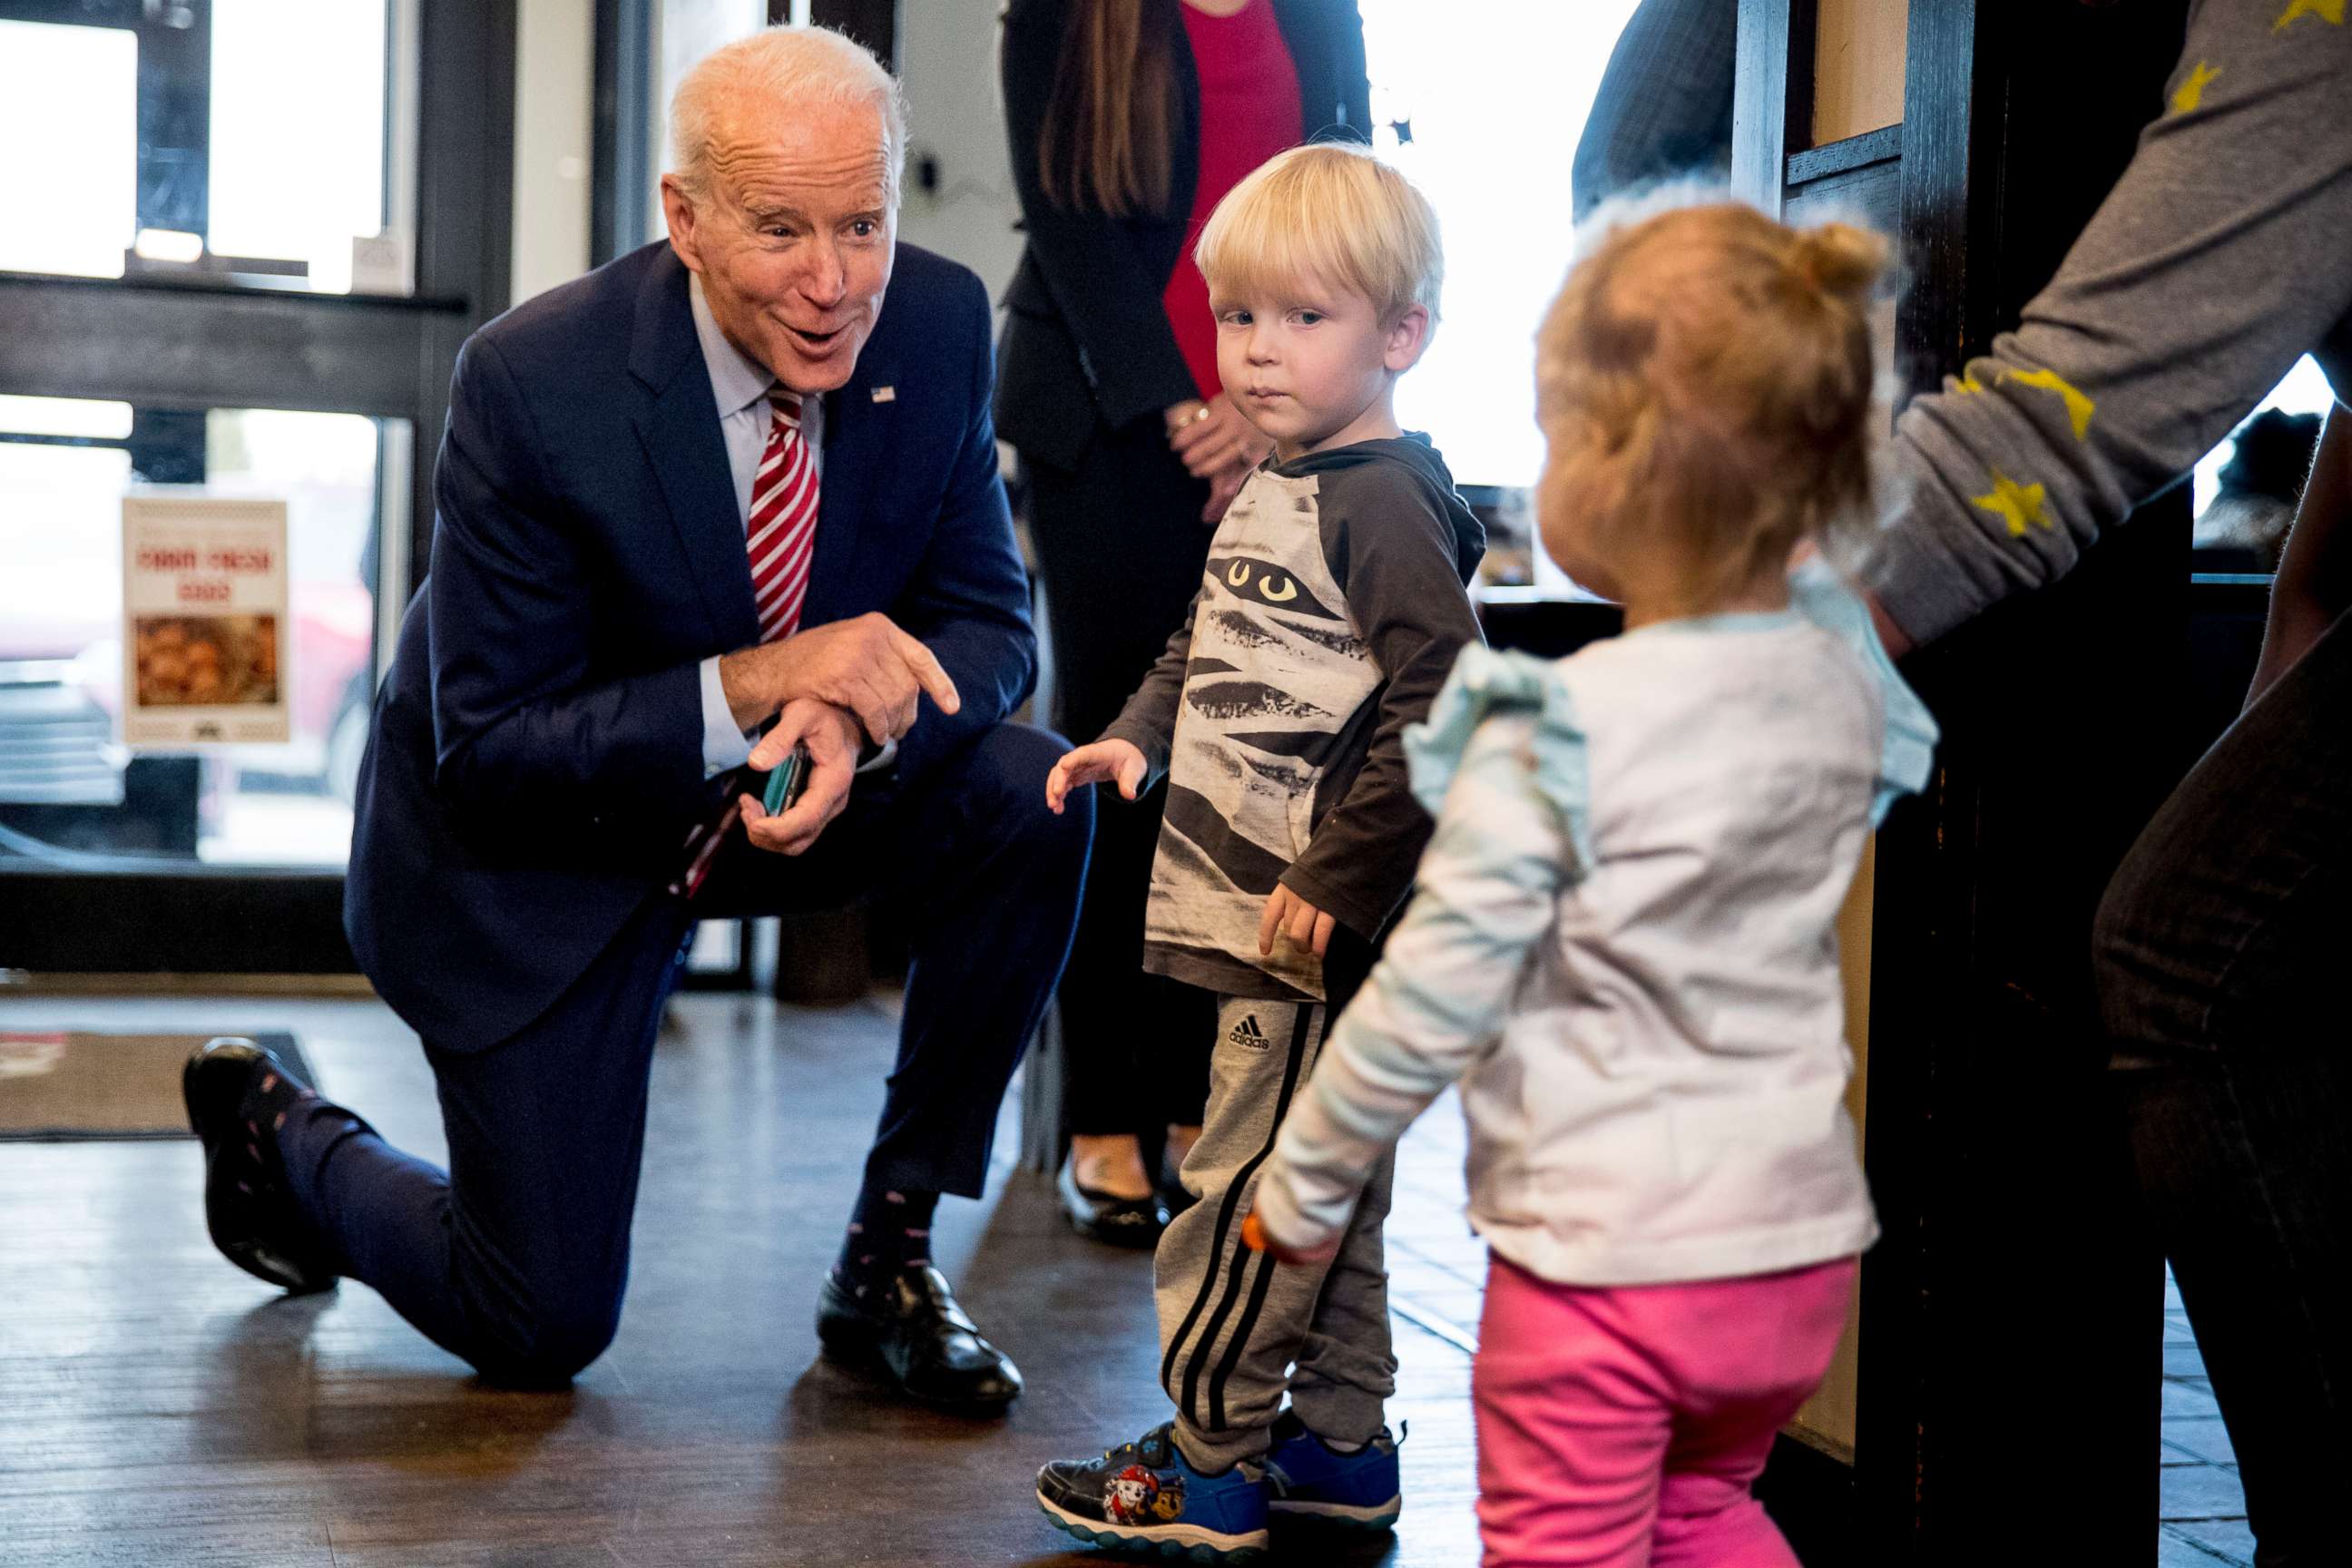 PHOTO: Democratic presidential candidate former Vice President Joe Biden speaks with Jack Maiers, 4, and his sister Olive, 2, right, of Bettendorf, Iowa, as he arrives for lunch at Ross' Restaurant, Jan. 6, 2020, in Bettendorf, Iowa.